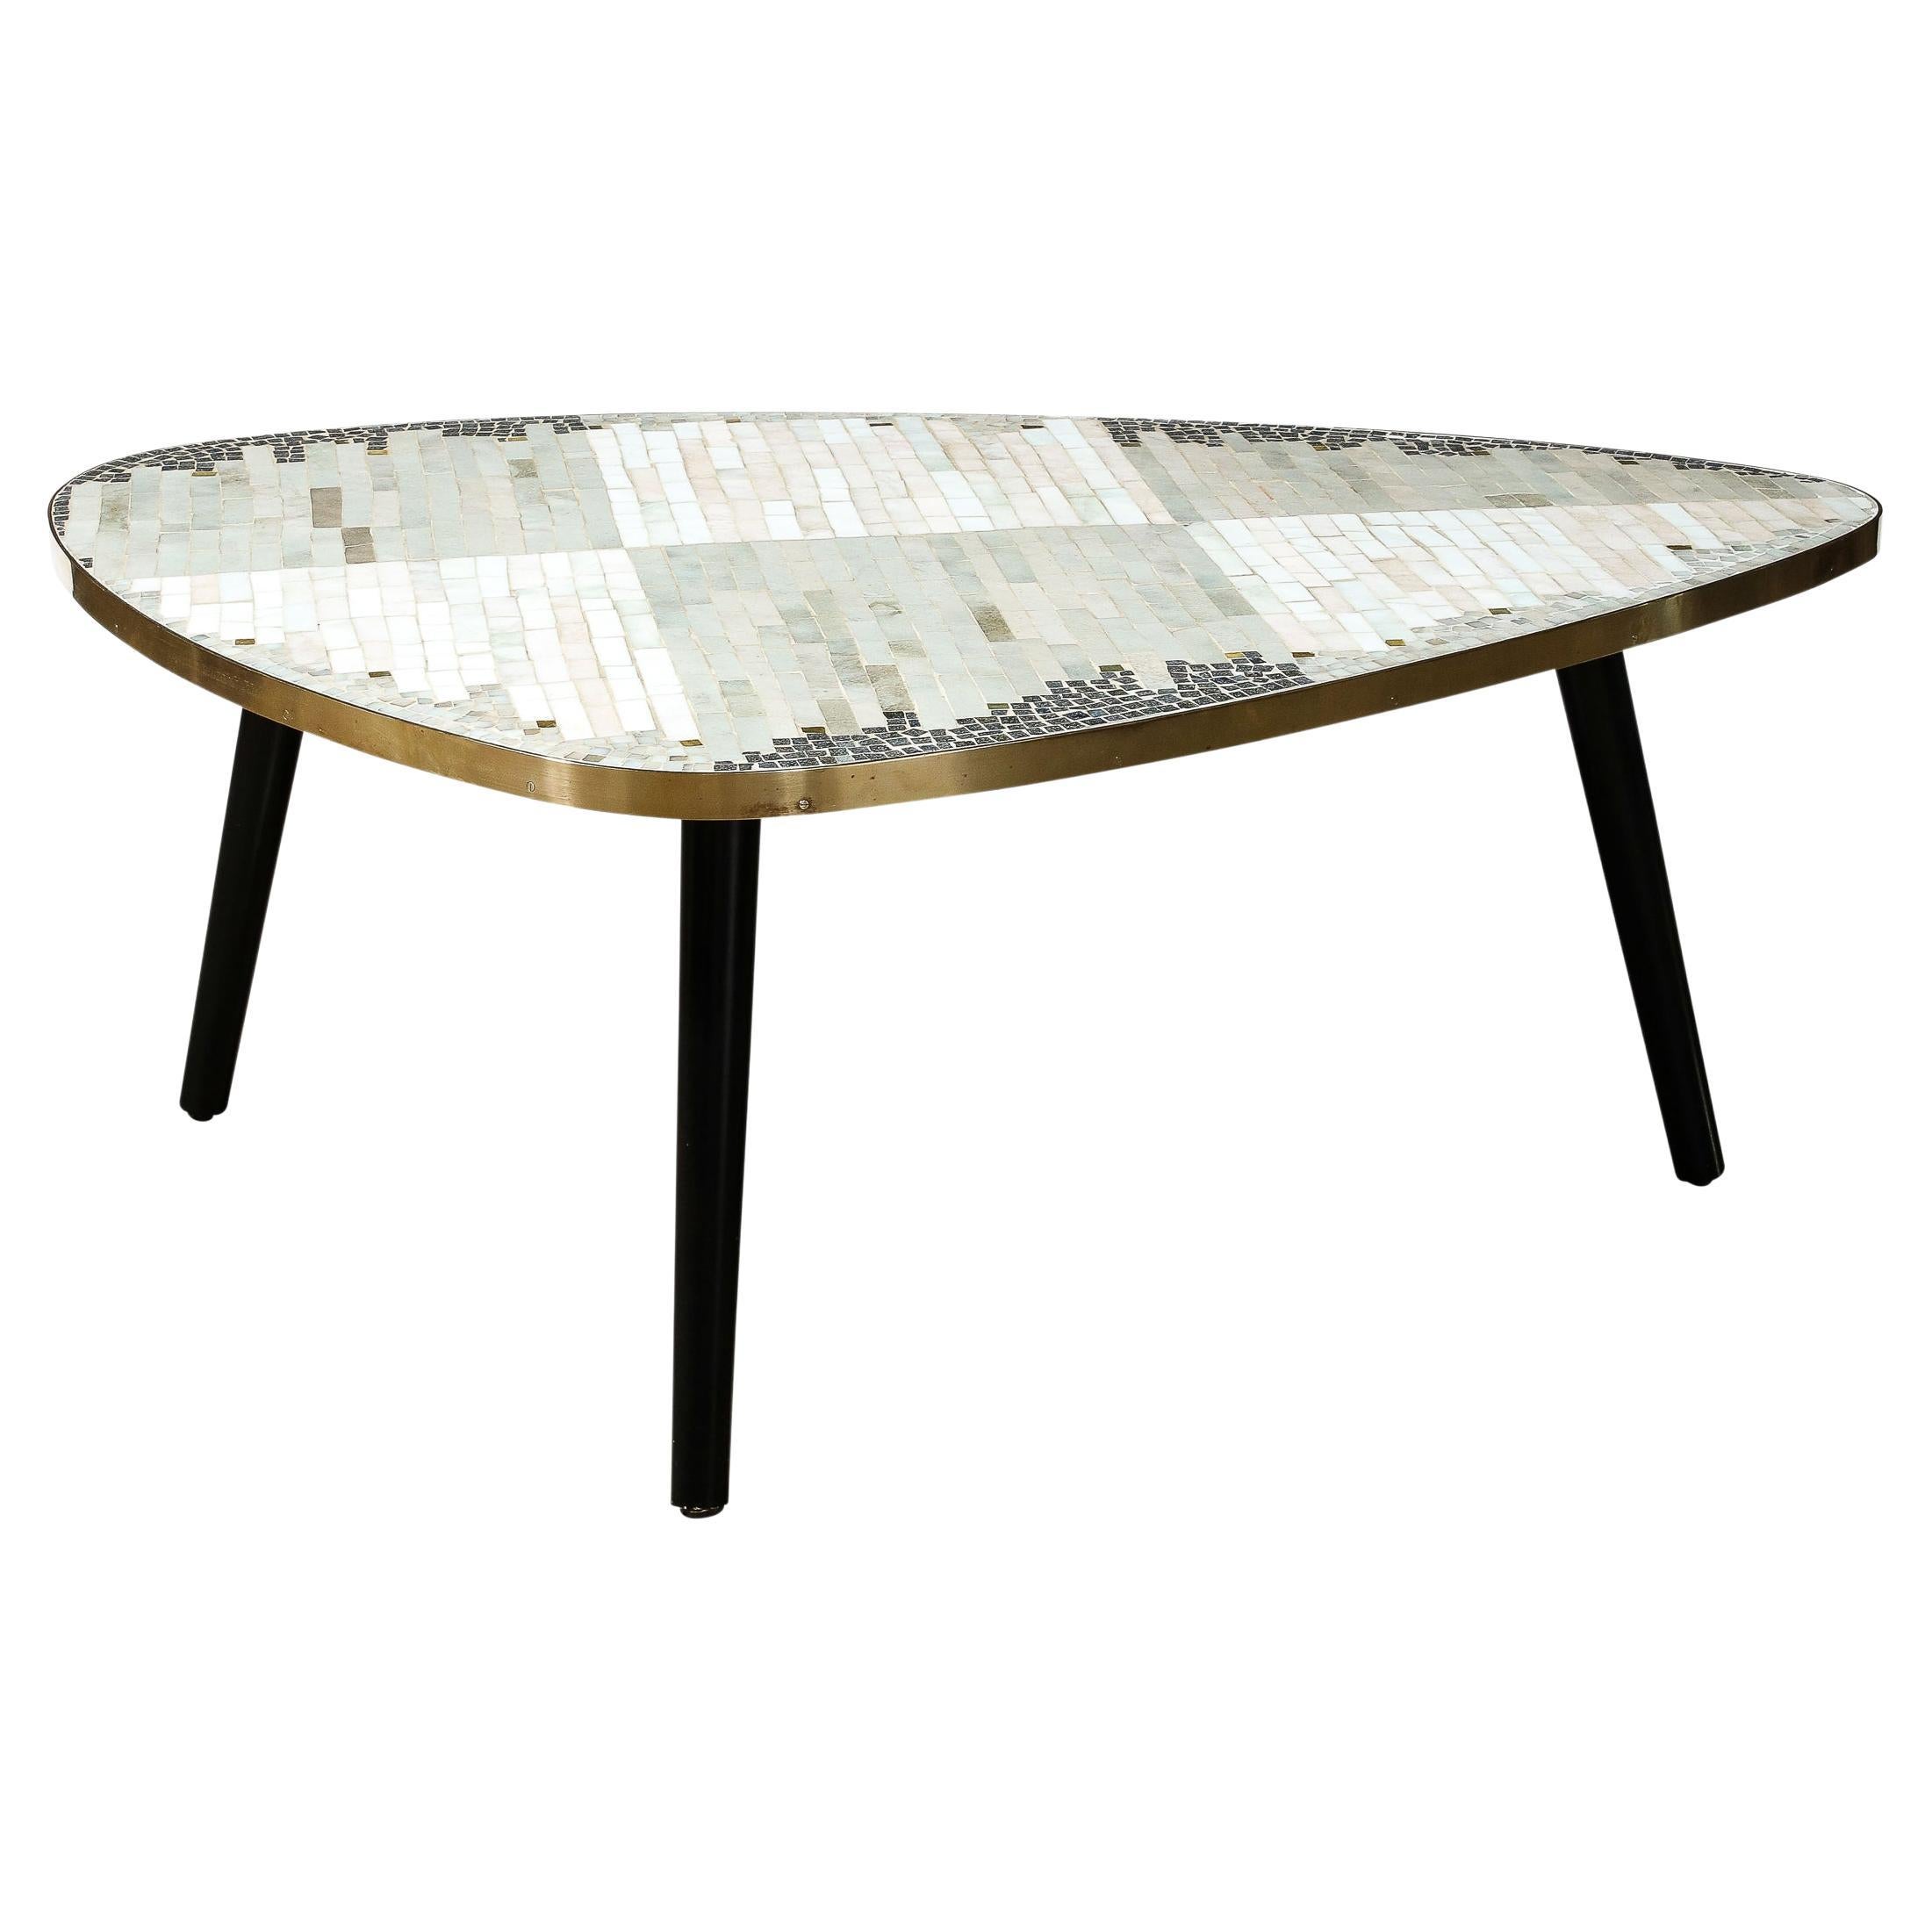 Mid-Century Modernist Mosaic Cocktail Table Wrapped in Brass with Ebonized Legs